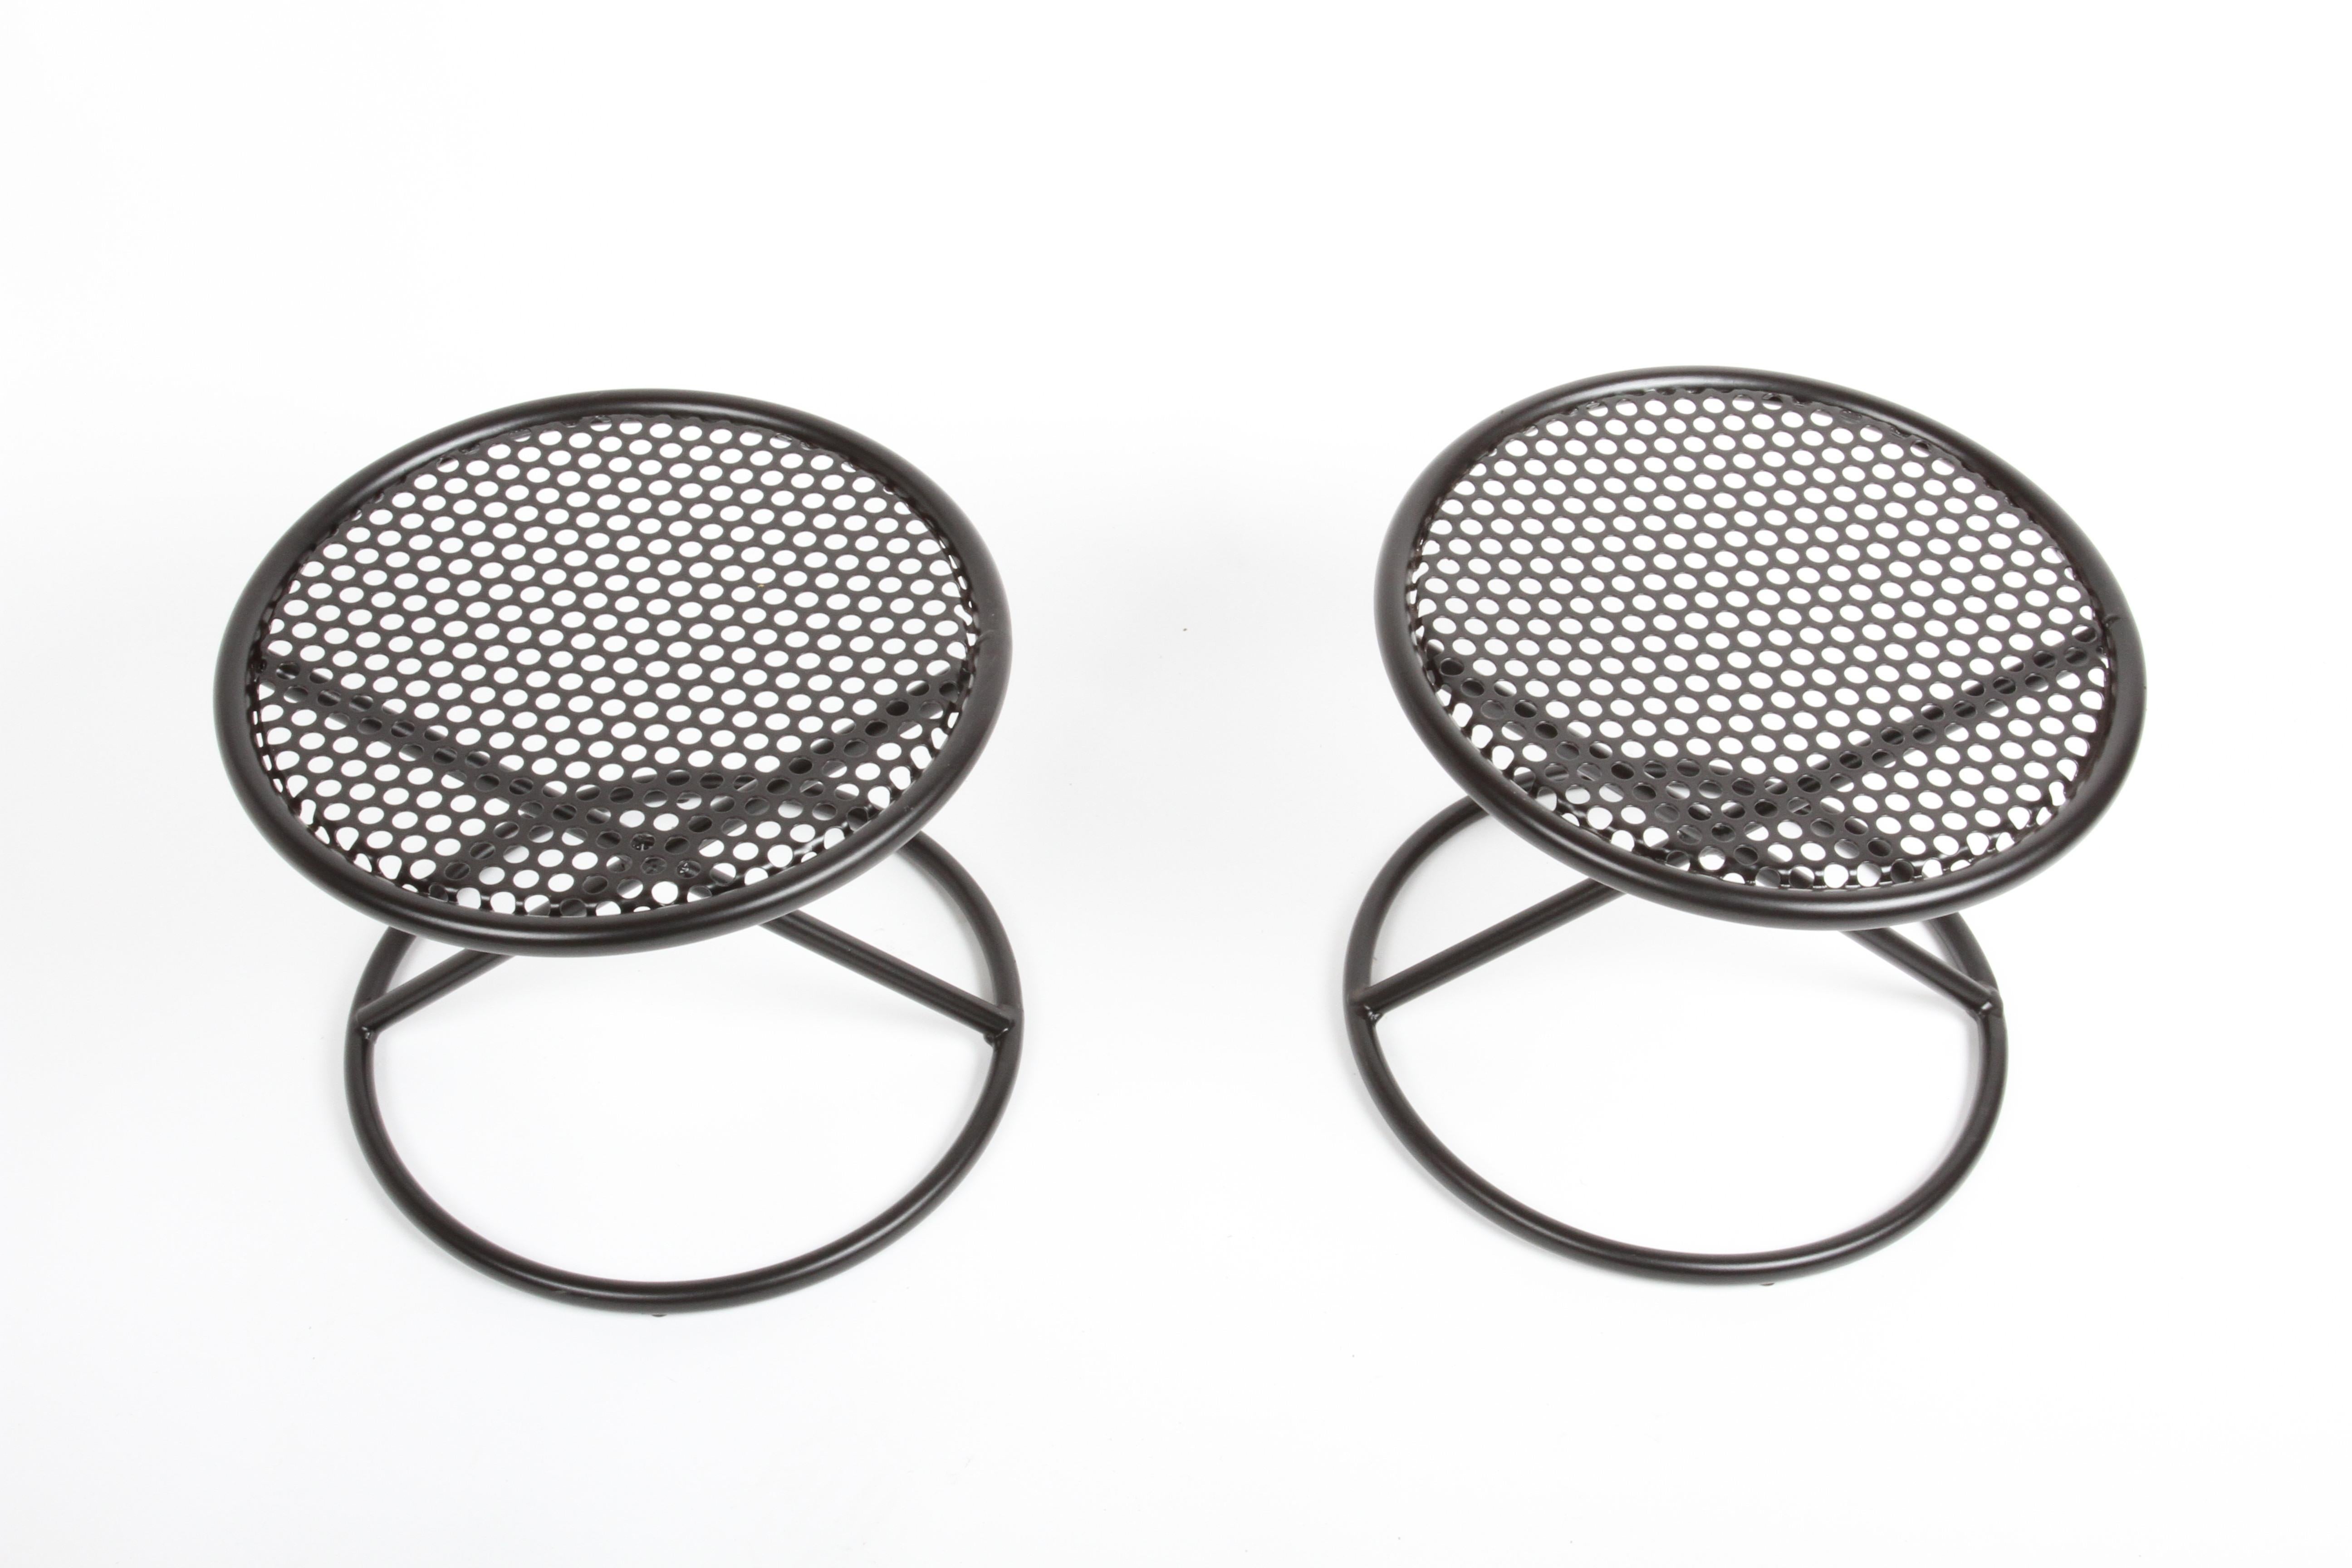 Painted Mathieu Matégot Style Round Patio Side Tables with Perforated Tops & X Supports For Sale